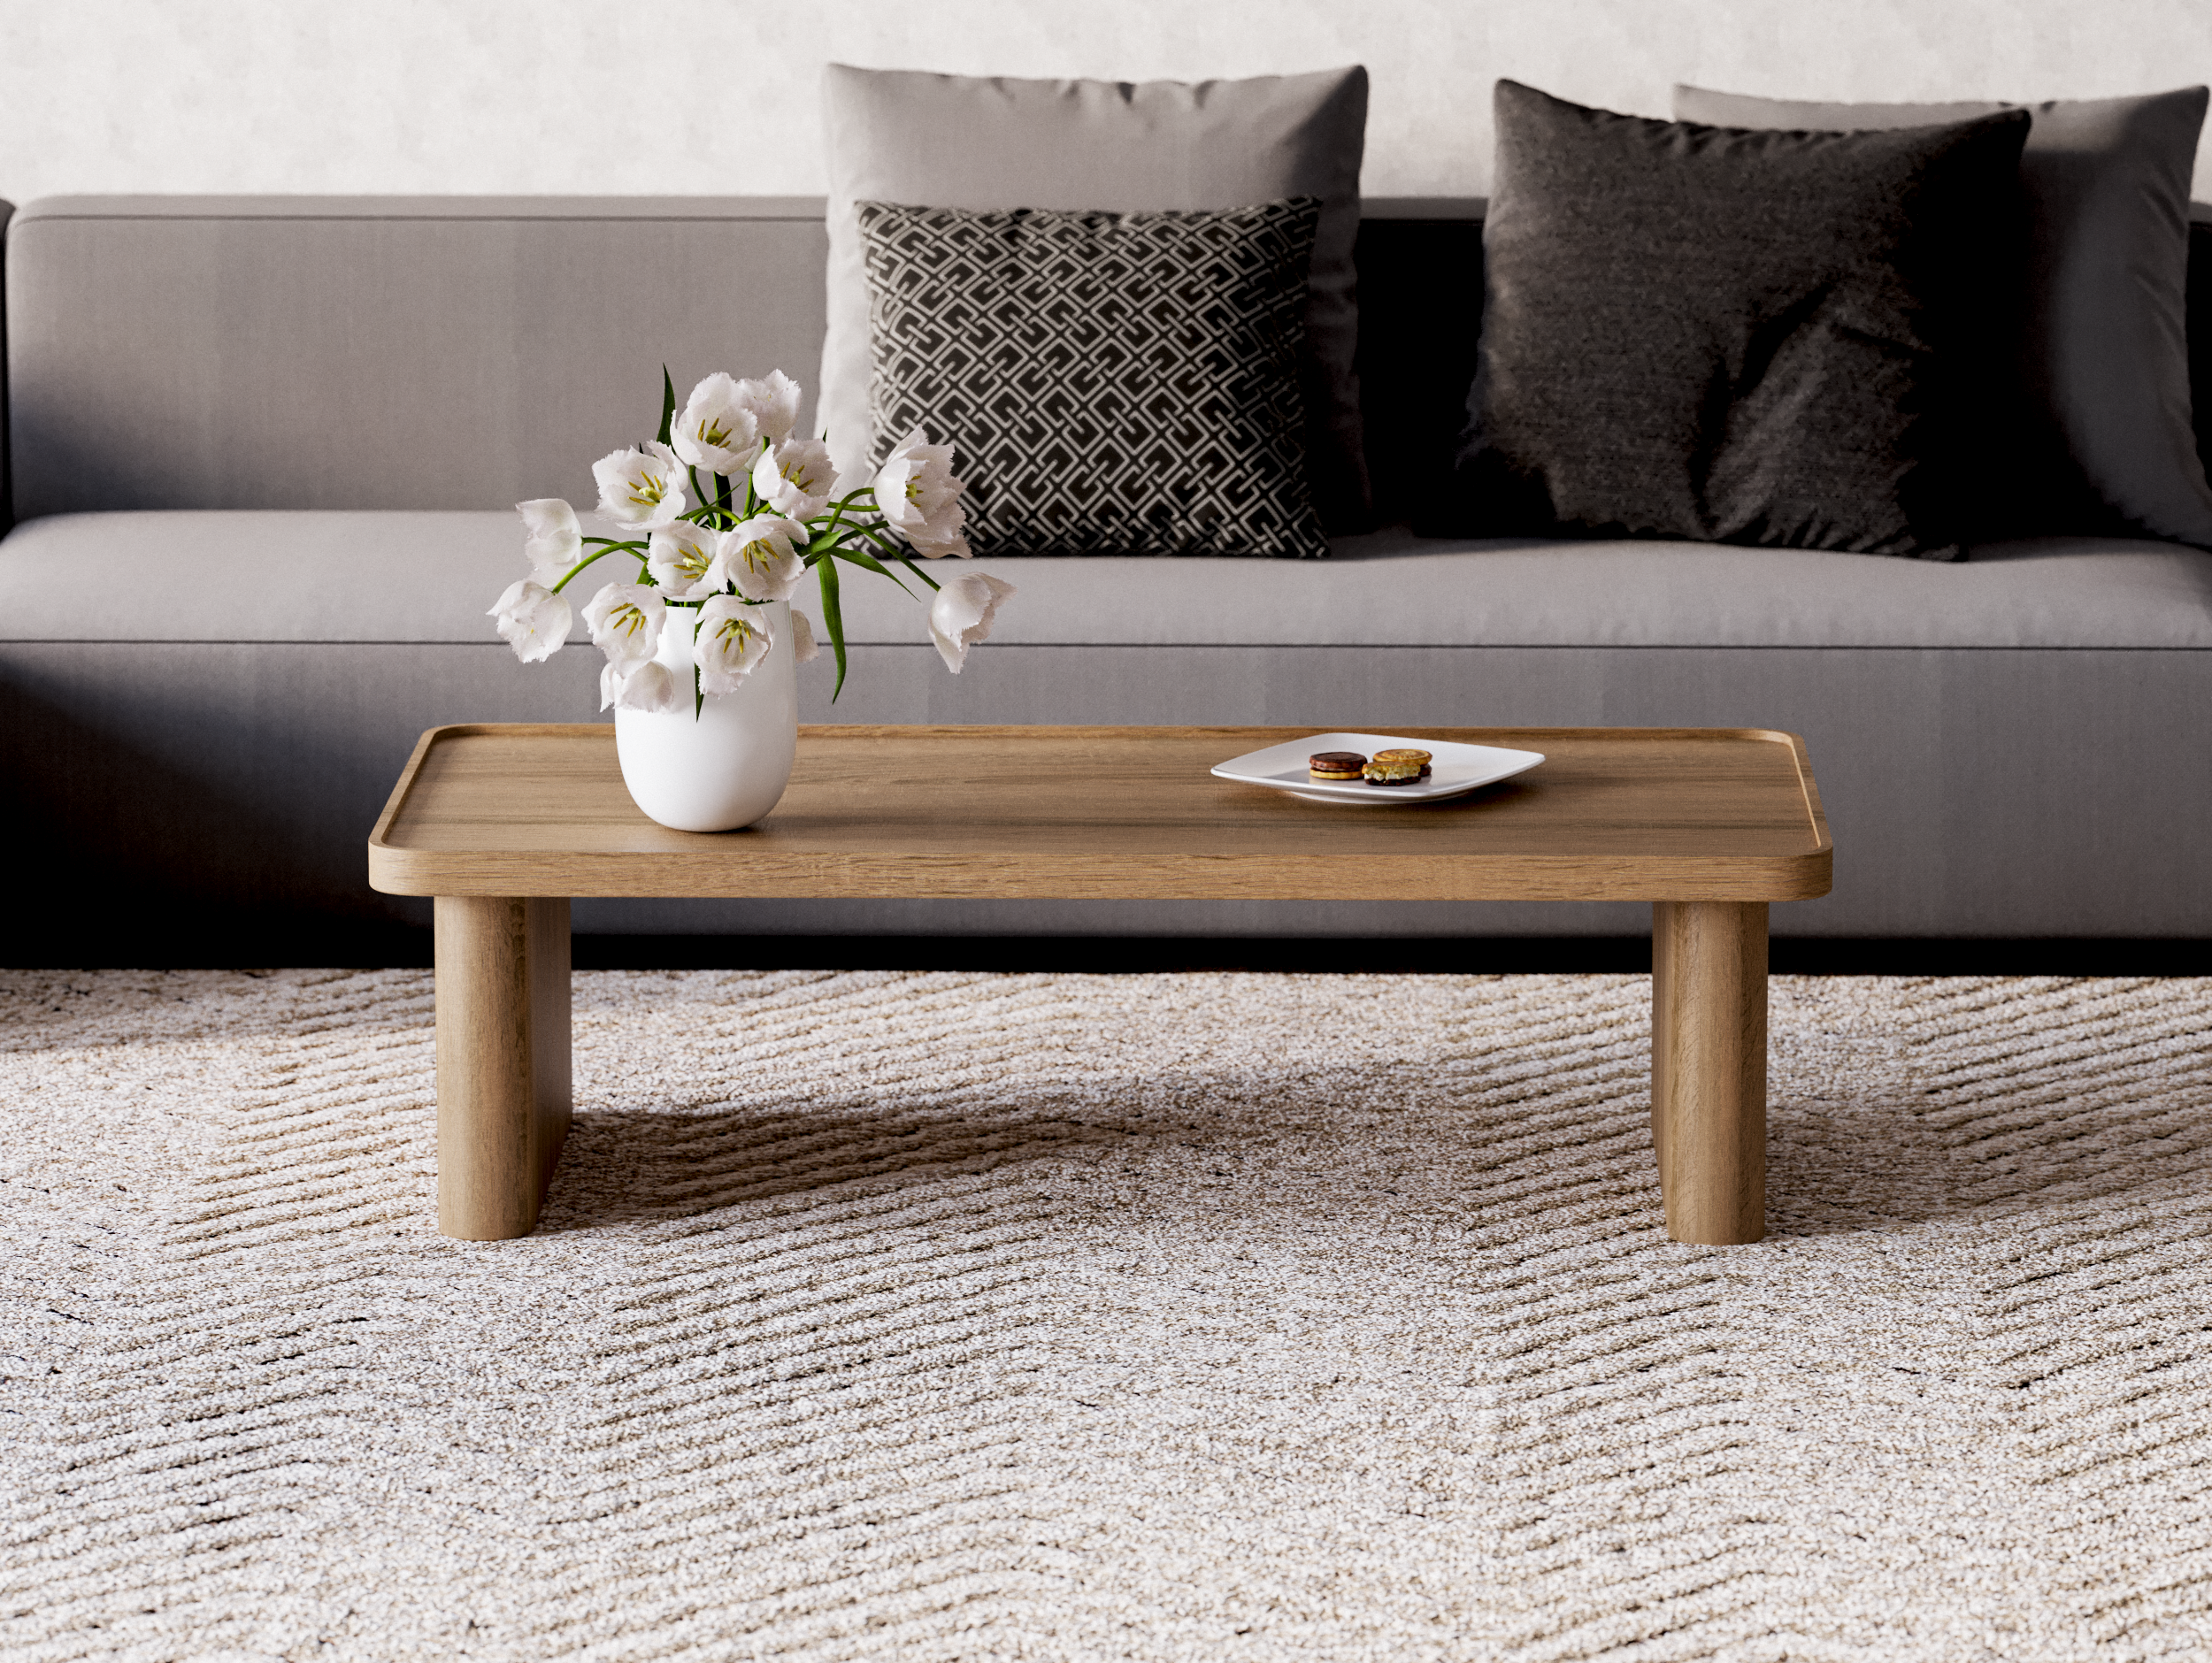 THE ROSEL - COFFEE TABLE